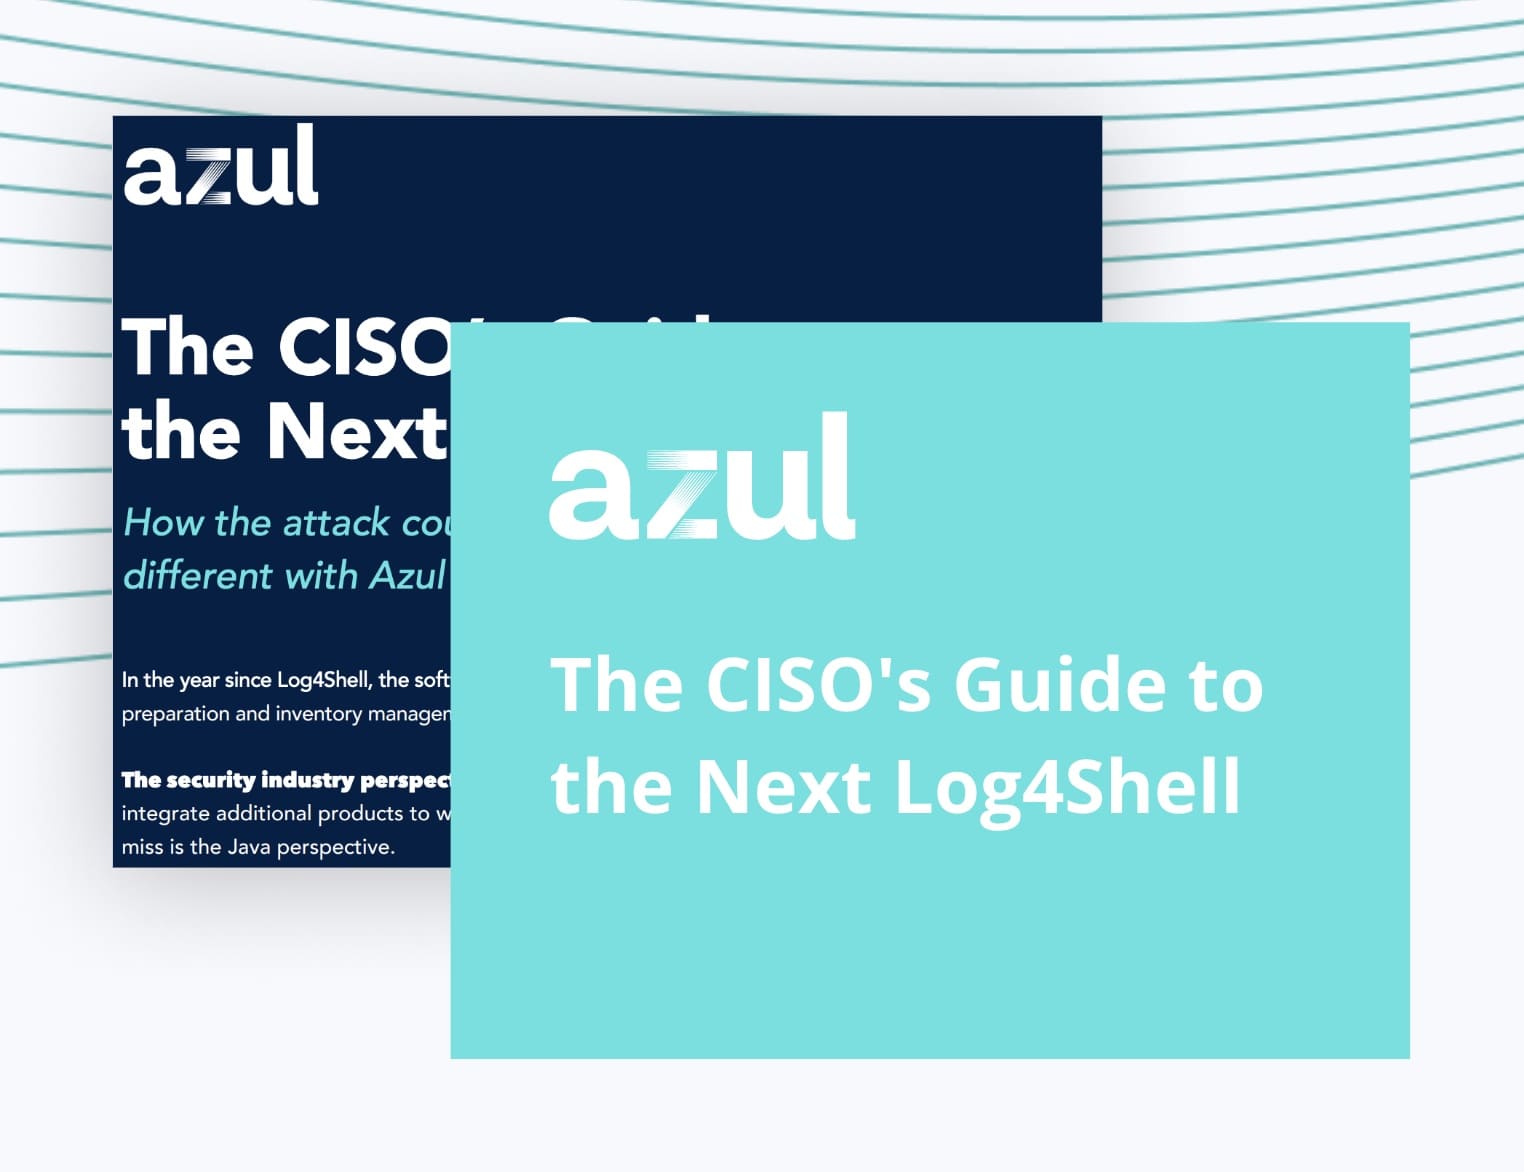 The CISO’s Guide to the Next Log4Shell